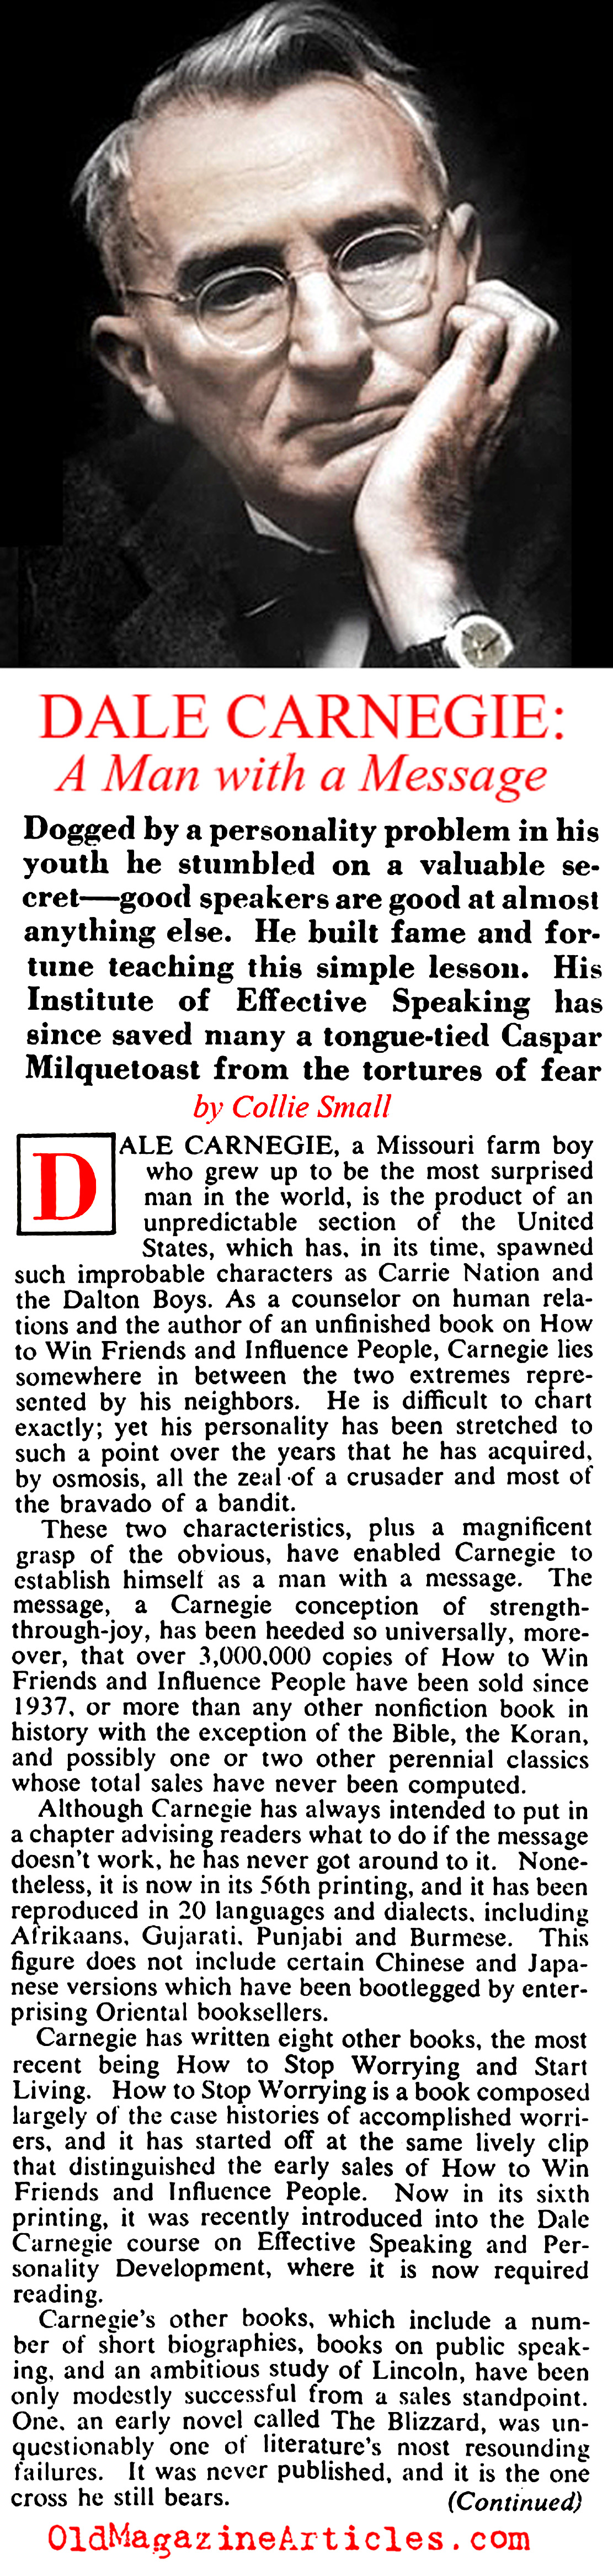 Dale Carnegie on Winning Friends and Influencing People (Collier's Magazine, 1949)